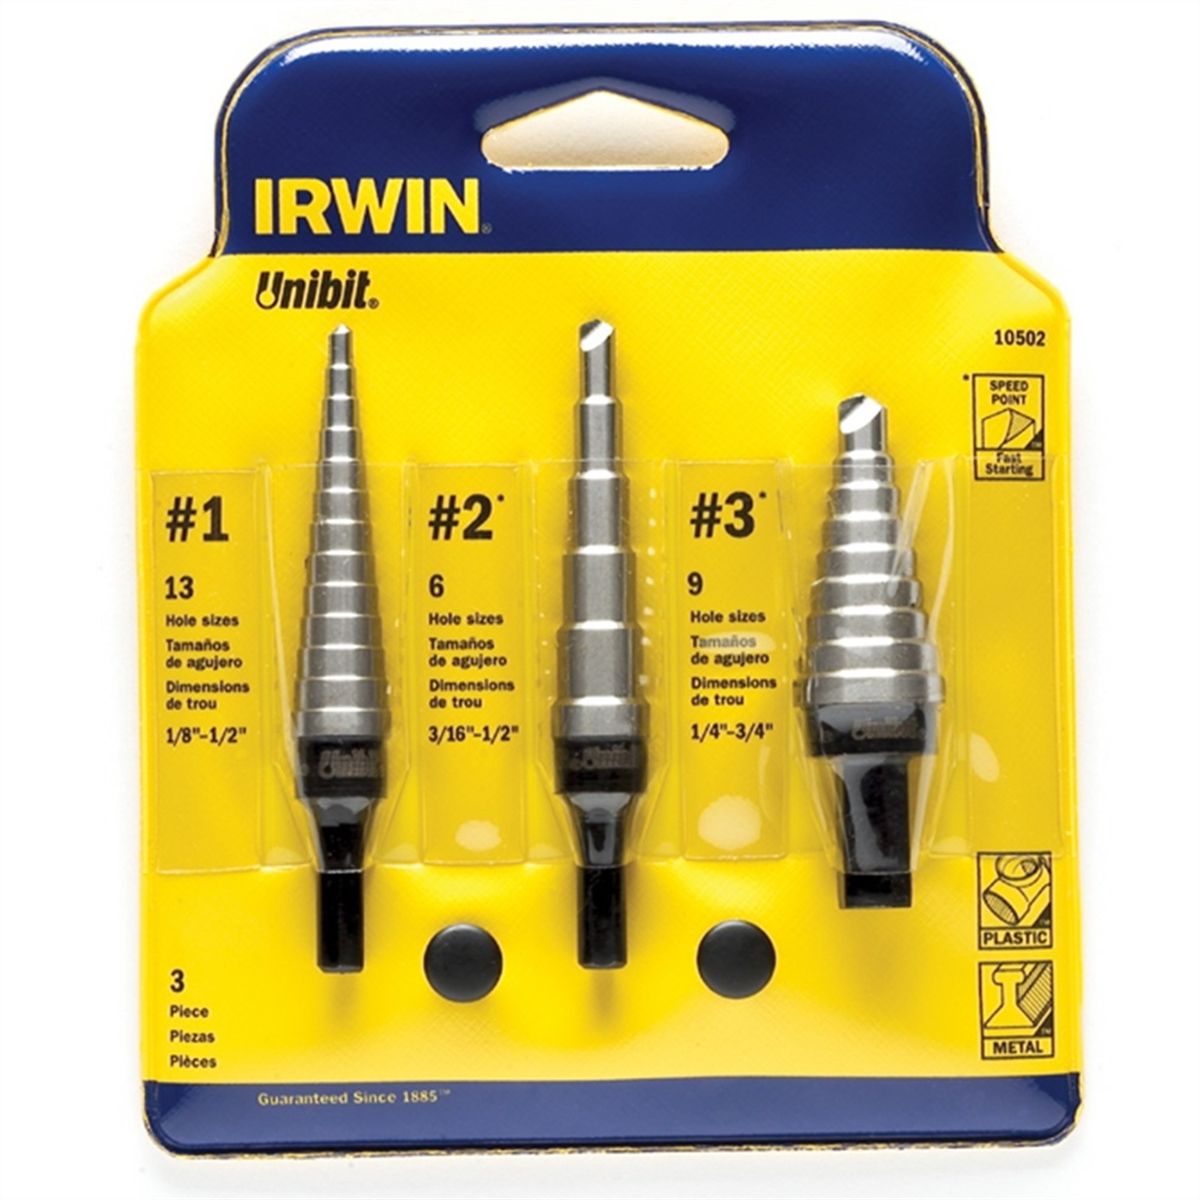 Irwin 10502 Unibit Step Drill Set - Includes HSS #1, 2, and 3 VG